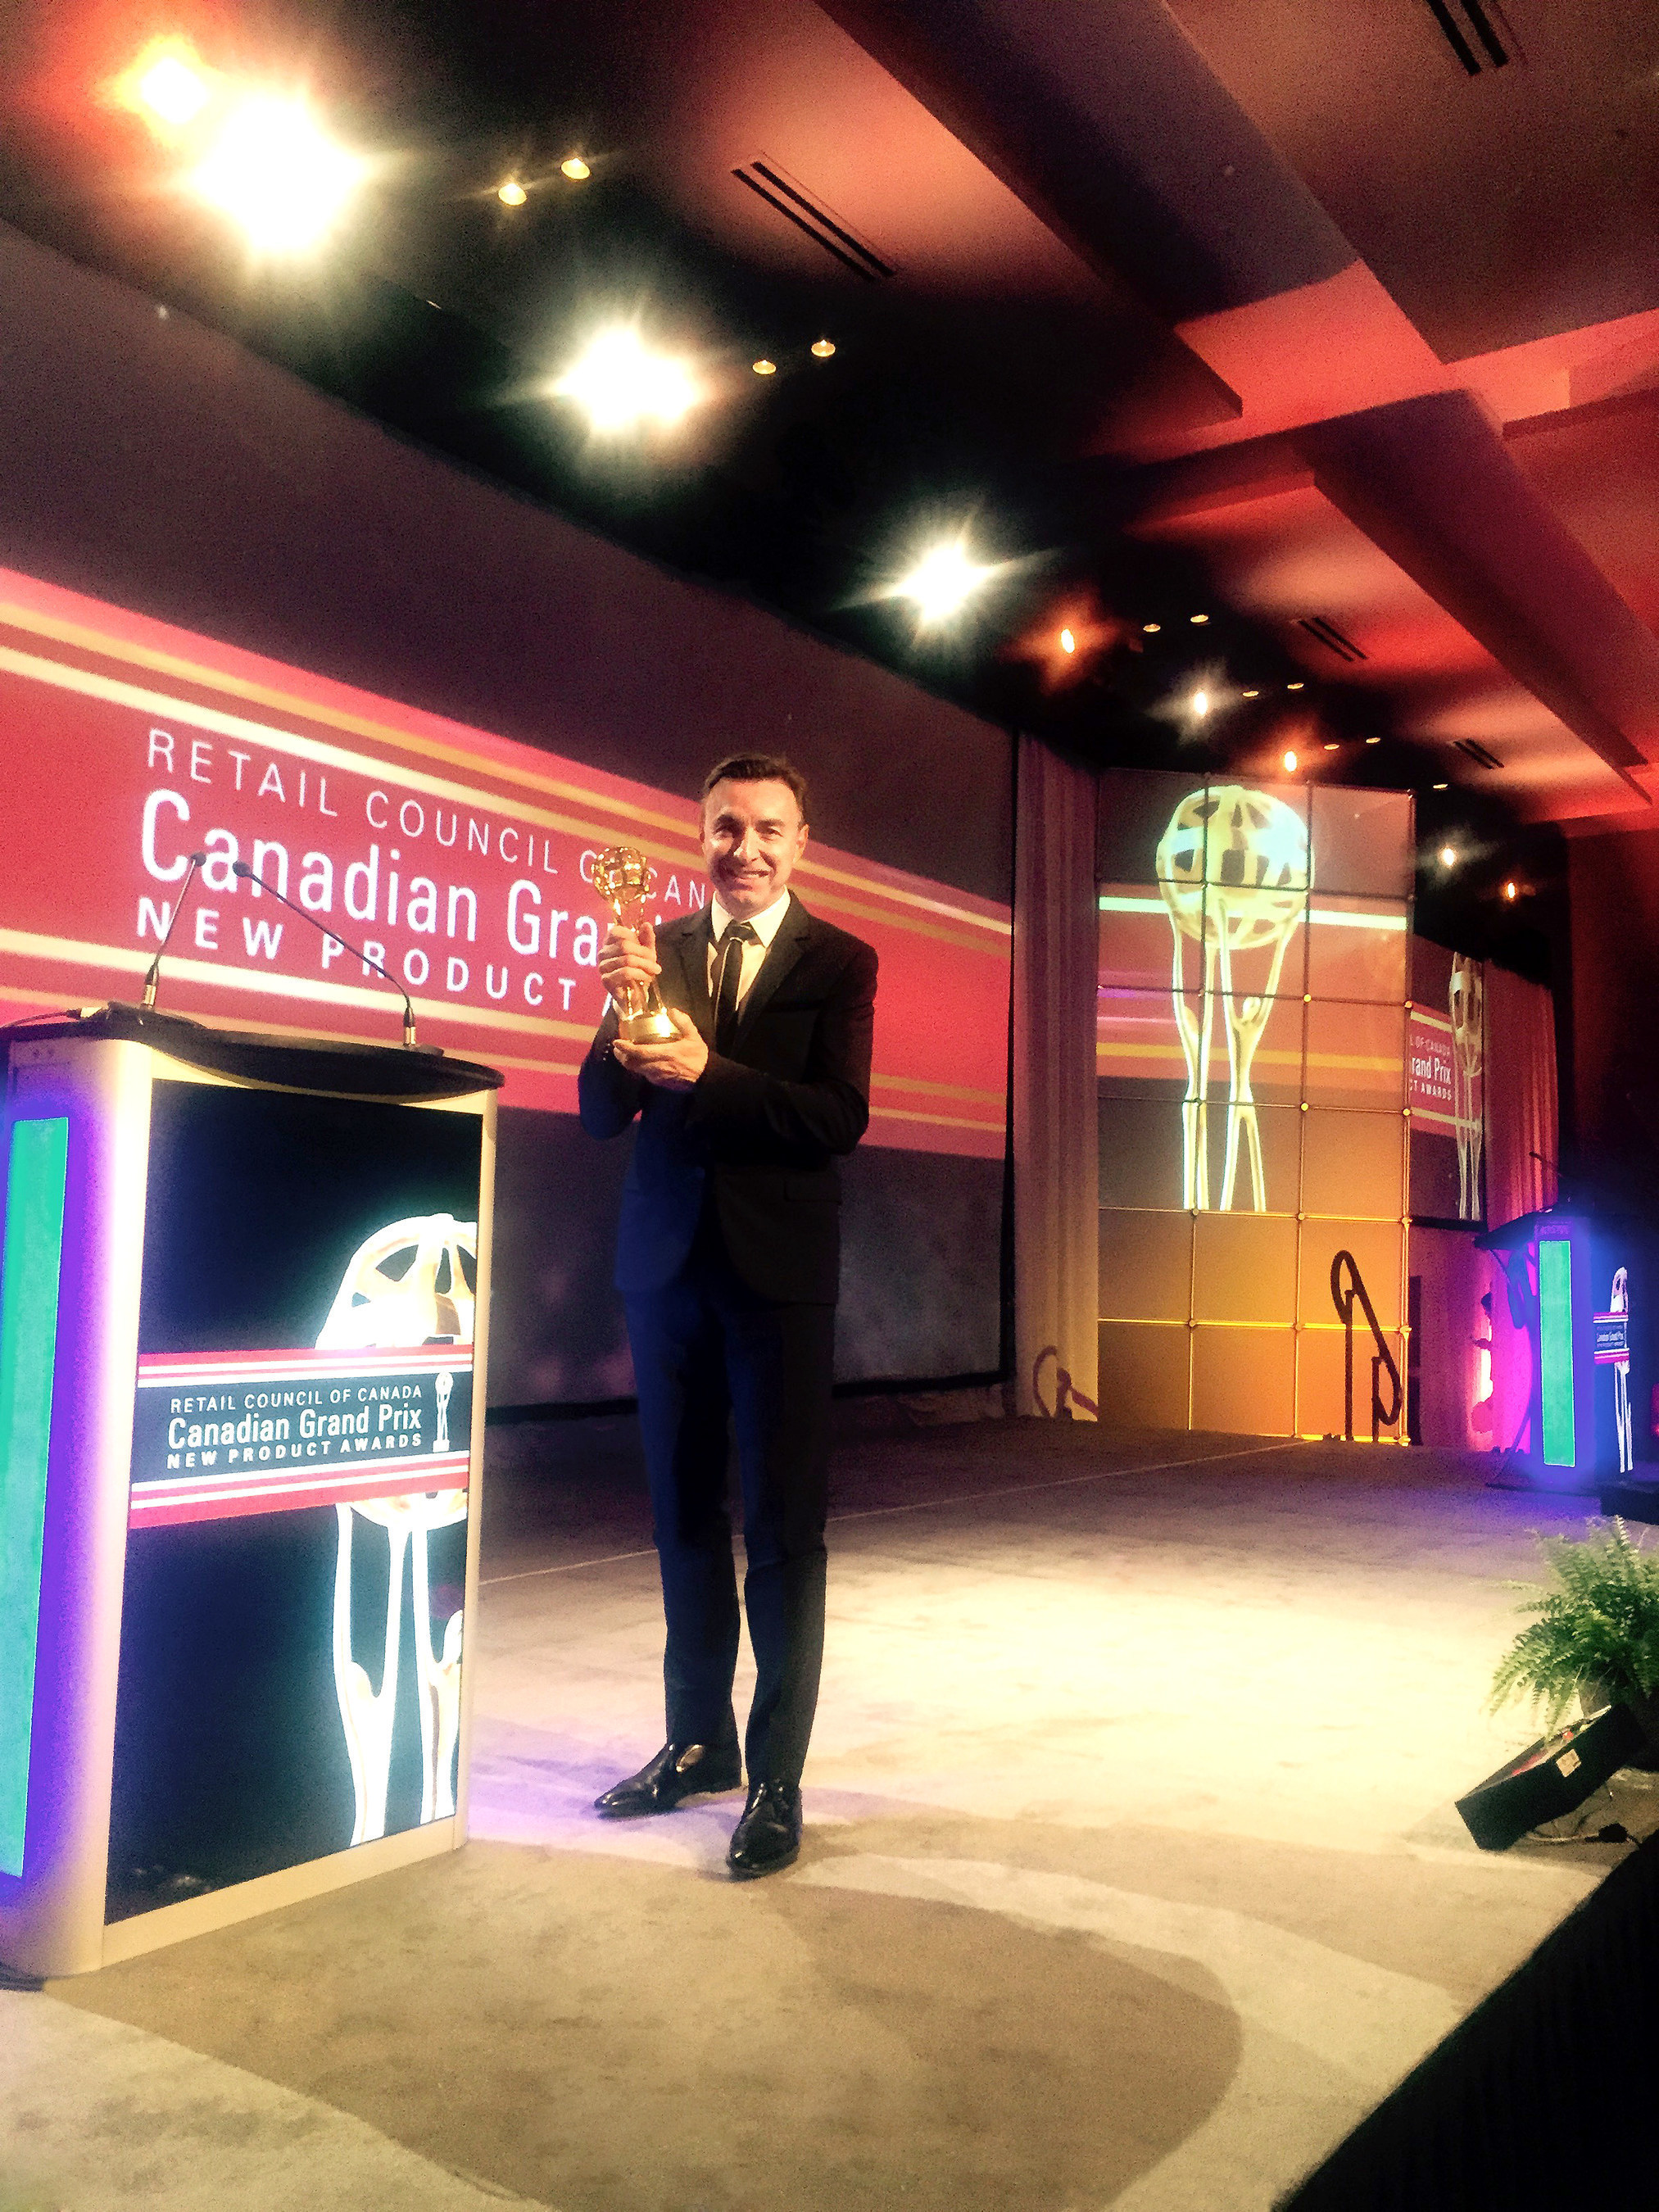 Yves Potvin, Founder & President of gardein at the 22nd annual Canadian Grand Prix New Product Awards.